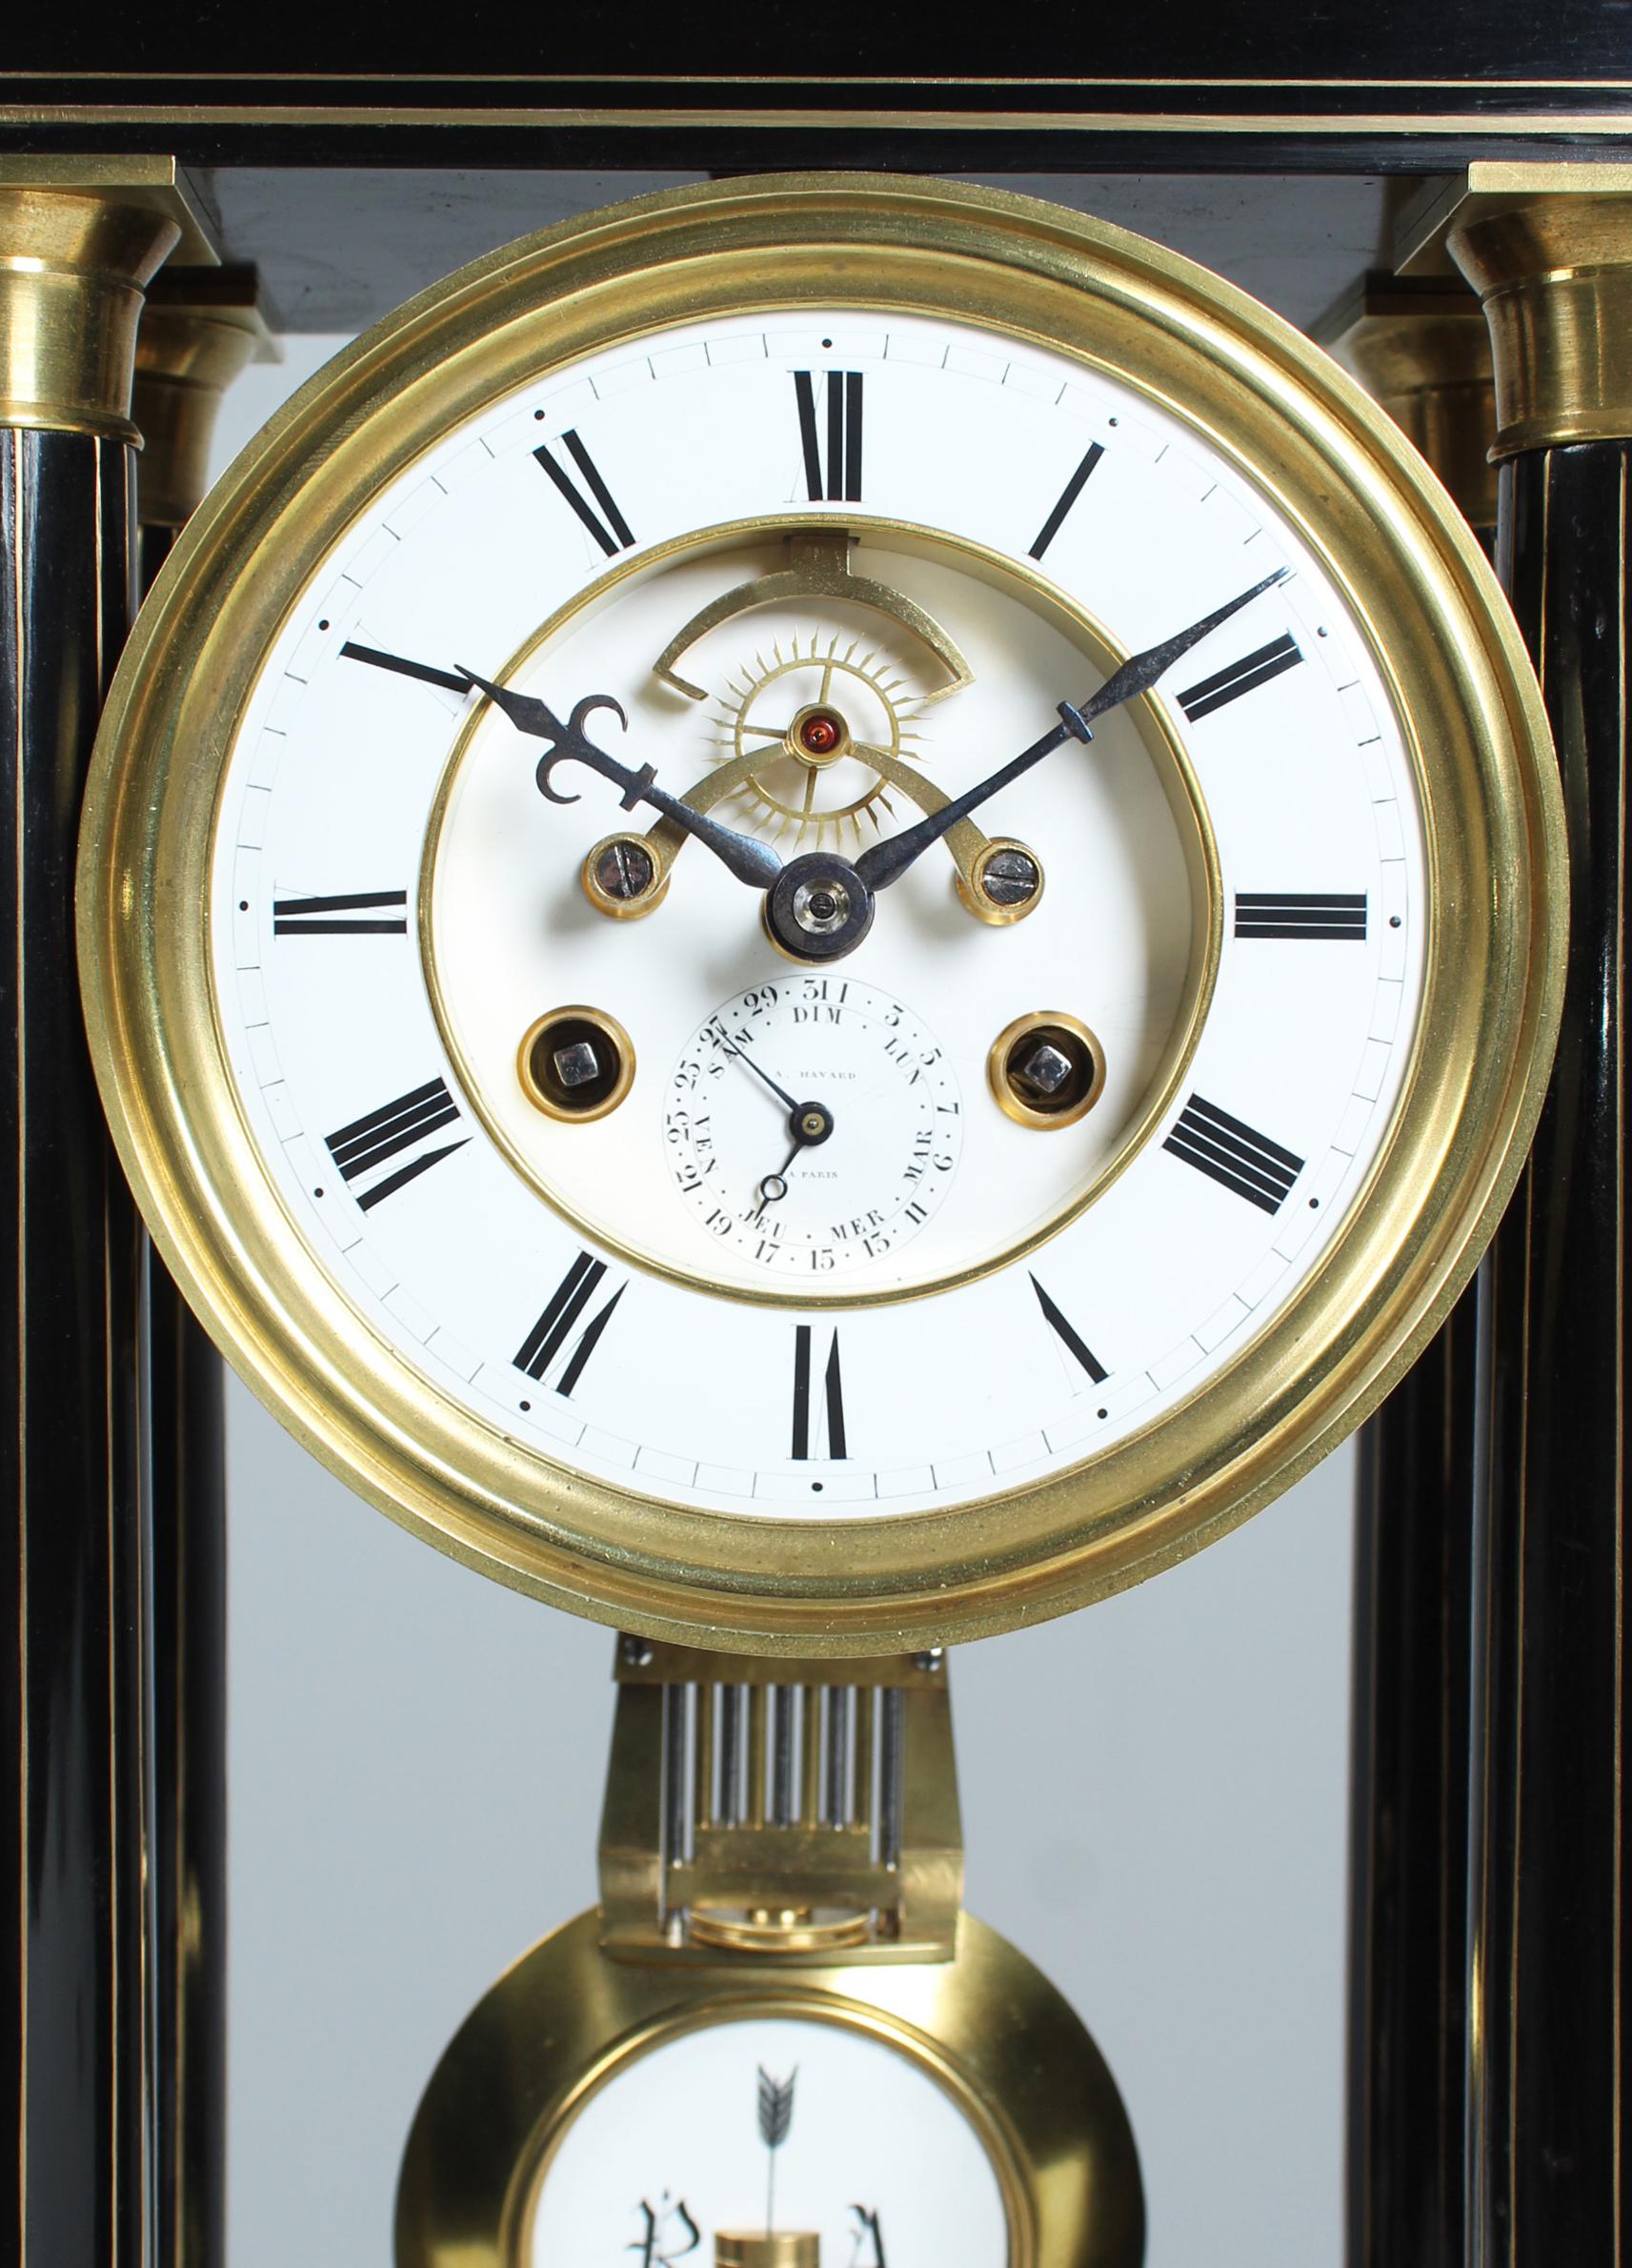 Antique Portal Clock with Date and Open Escapement

France
Wood, brass, enamel
around 1870

Dimensions: H x W x D: 50 x 26 x 16 cm

Description:
Interesting and decorative portal clock with date display.

The case is made of ebonised wood with brass